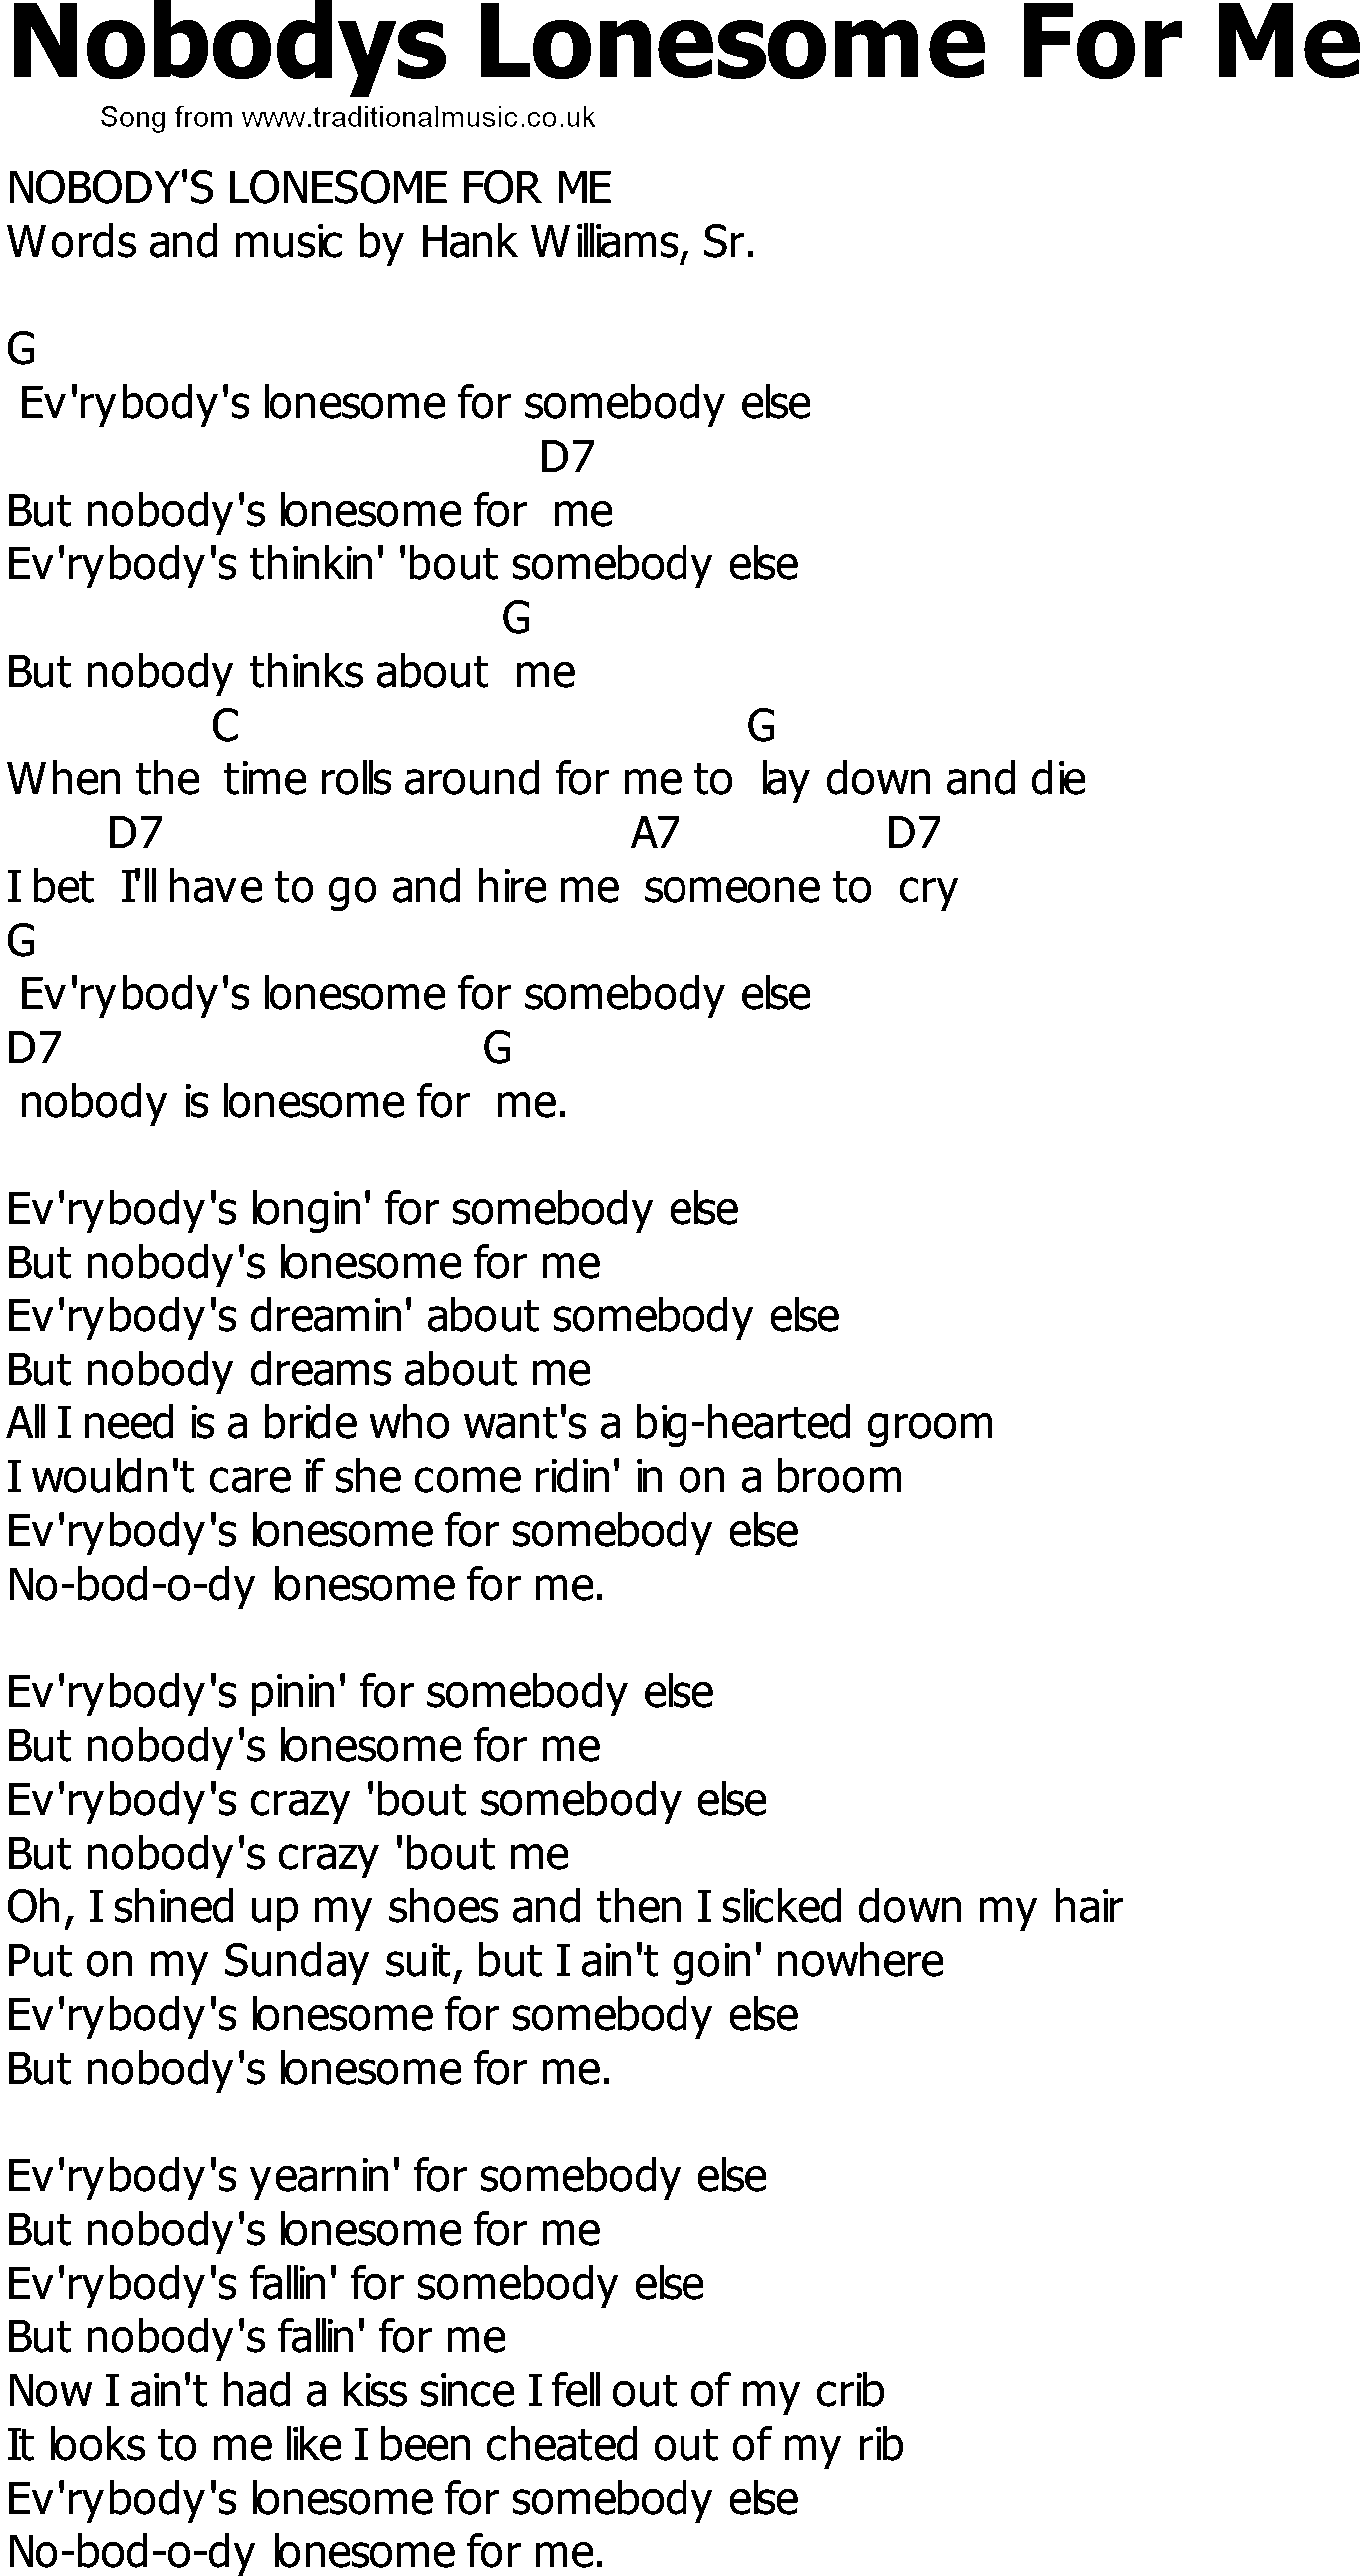 Old Country song lyrics with chords - Nobodys Lonesome For Me